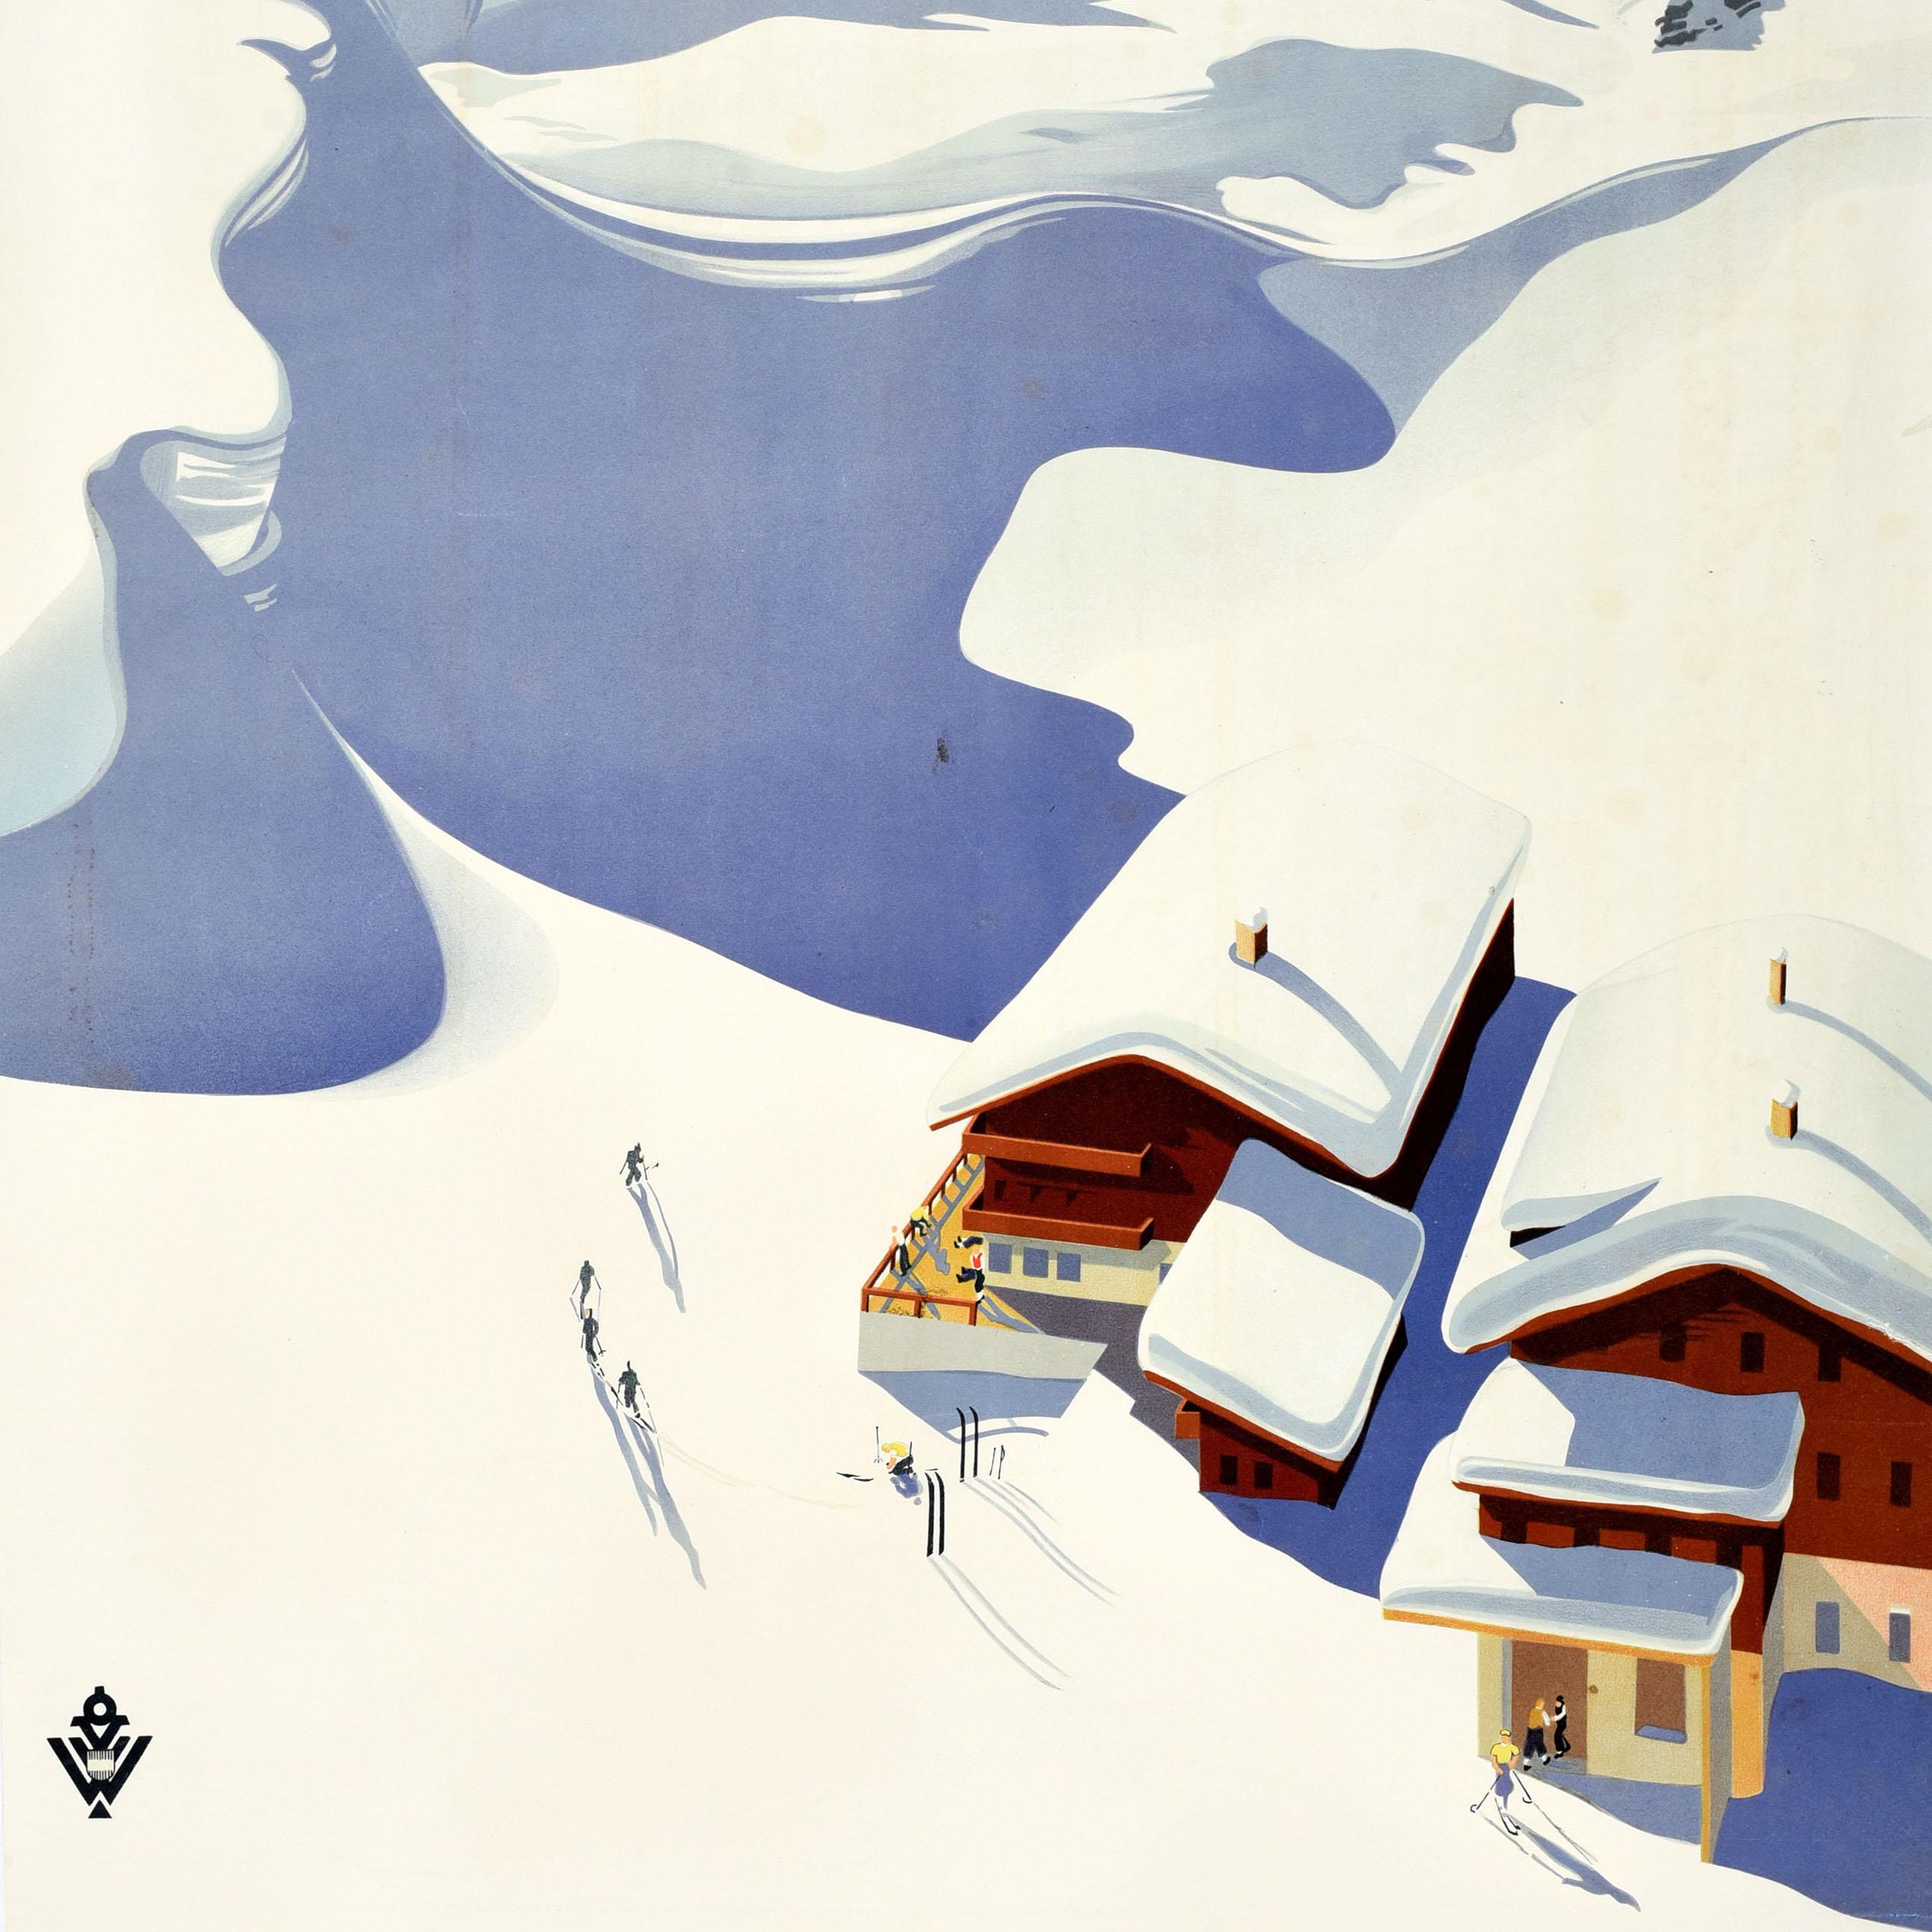 Original vintage winter sport and skiing travel poster for Austria featuring stunning artwork by Erich von Wunschheim depicting skiers on a snowy mountain next to snow topped chalets with people on the terrace and skis in the snow casting long